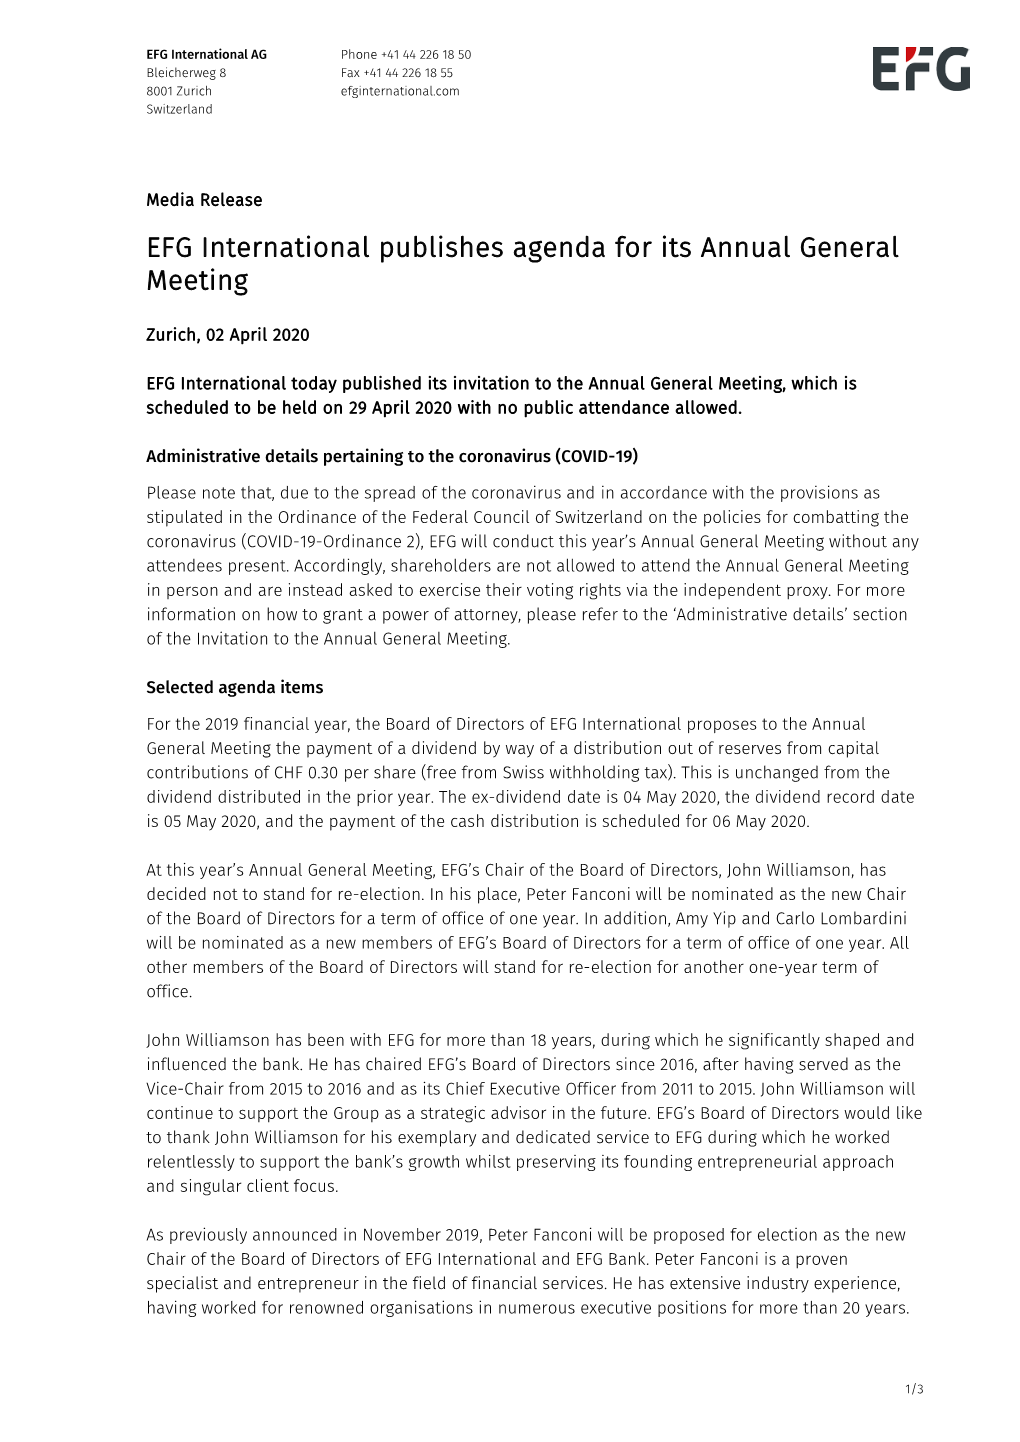 EFG International Publishes Agenda for Its Annual General Meeting